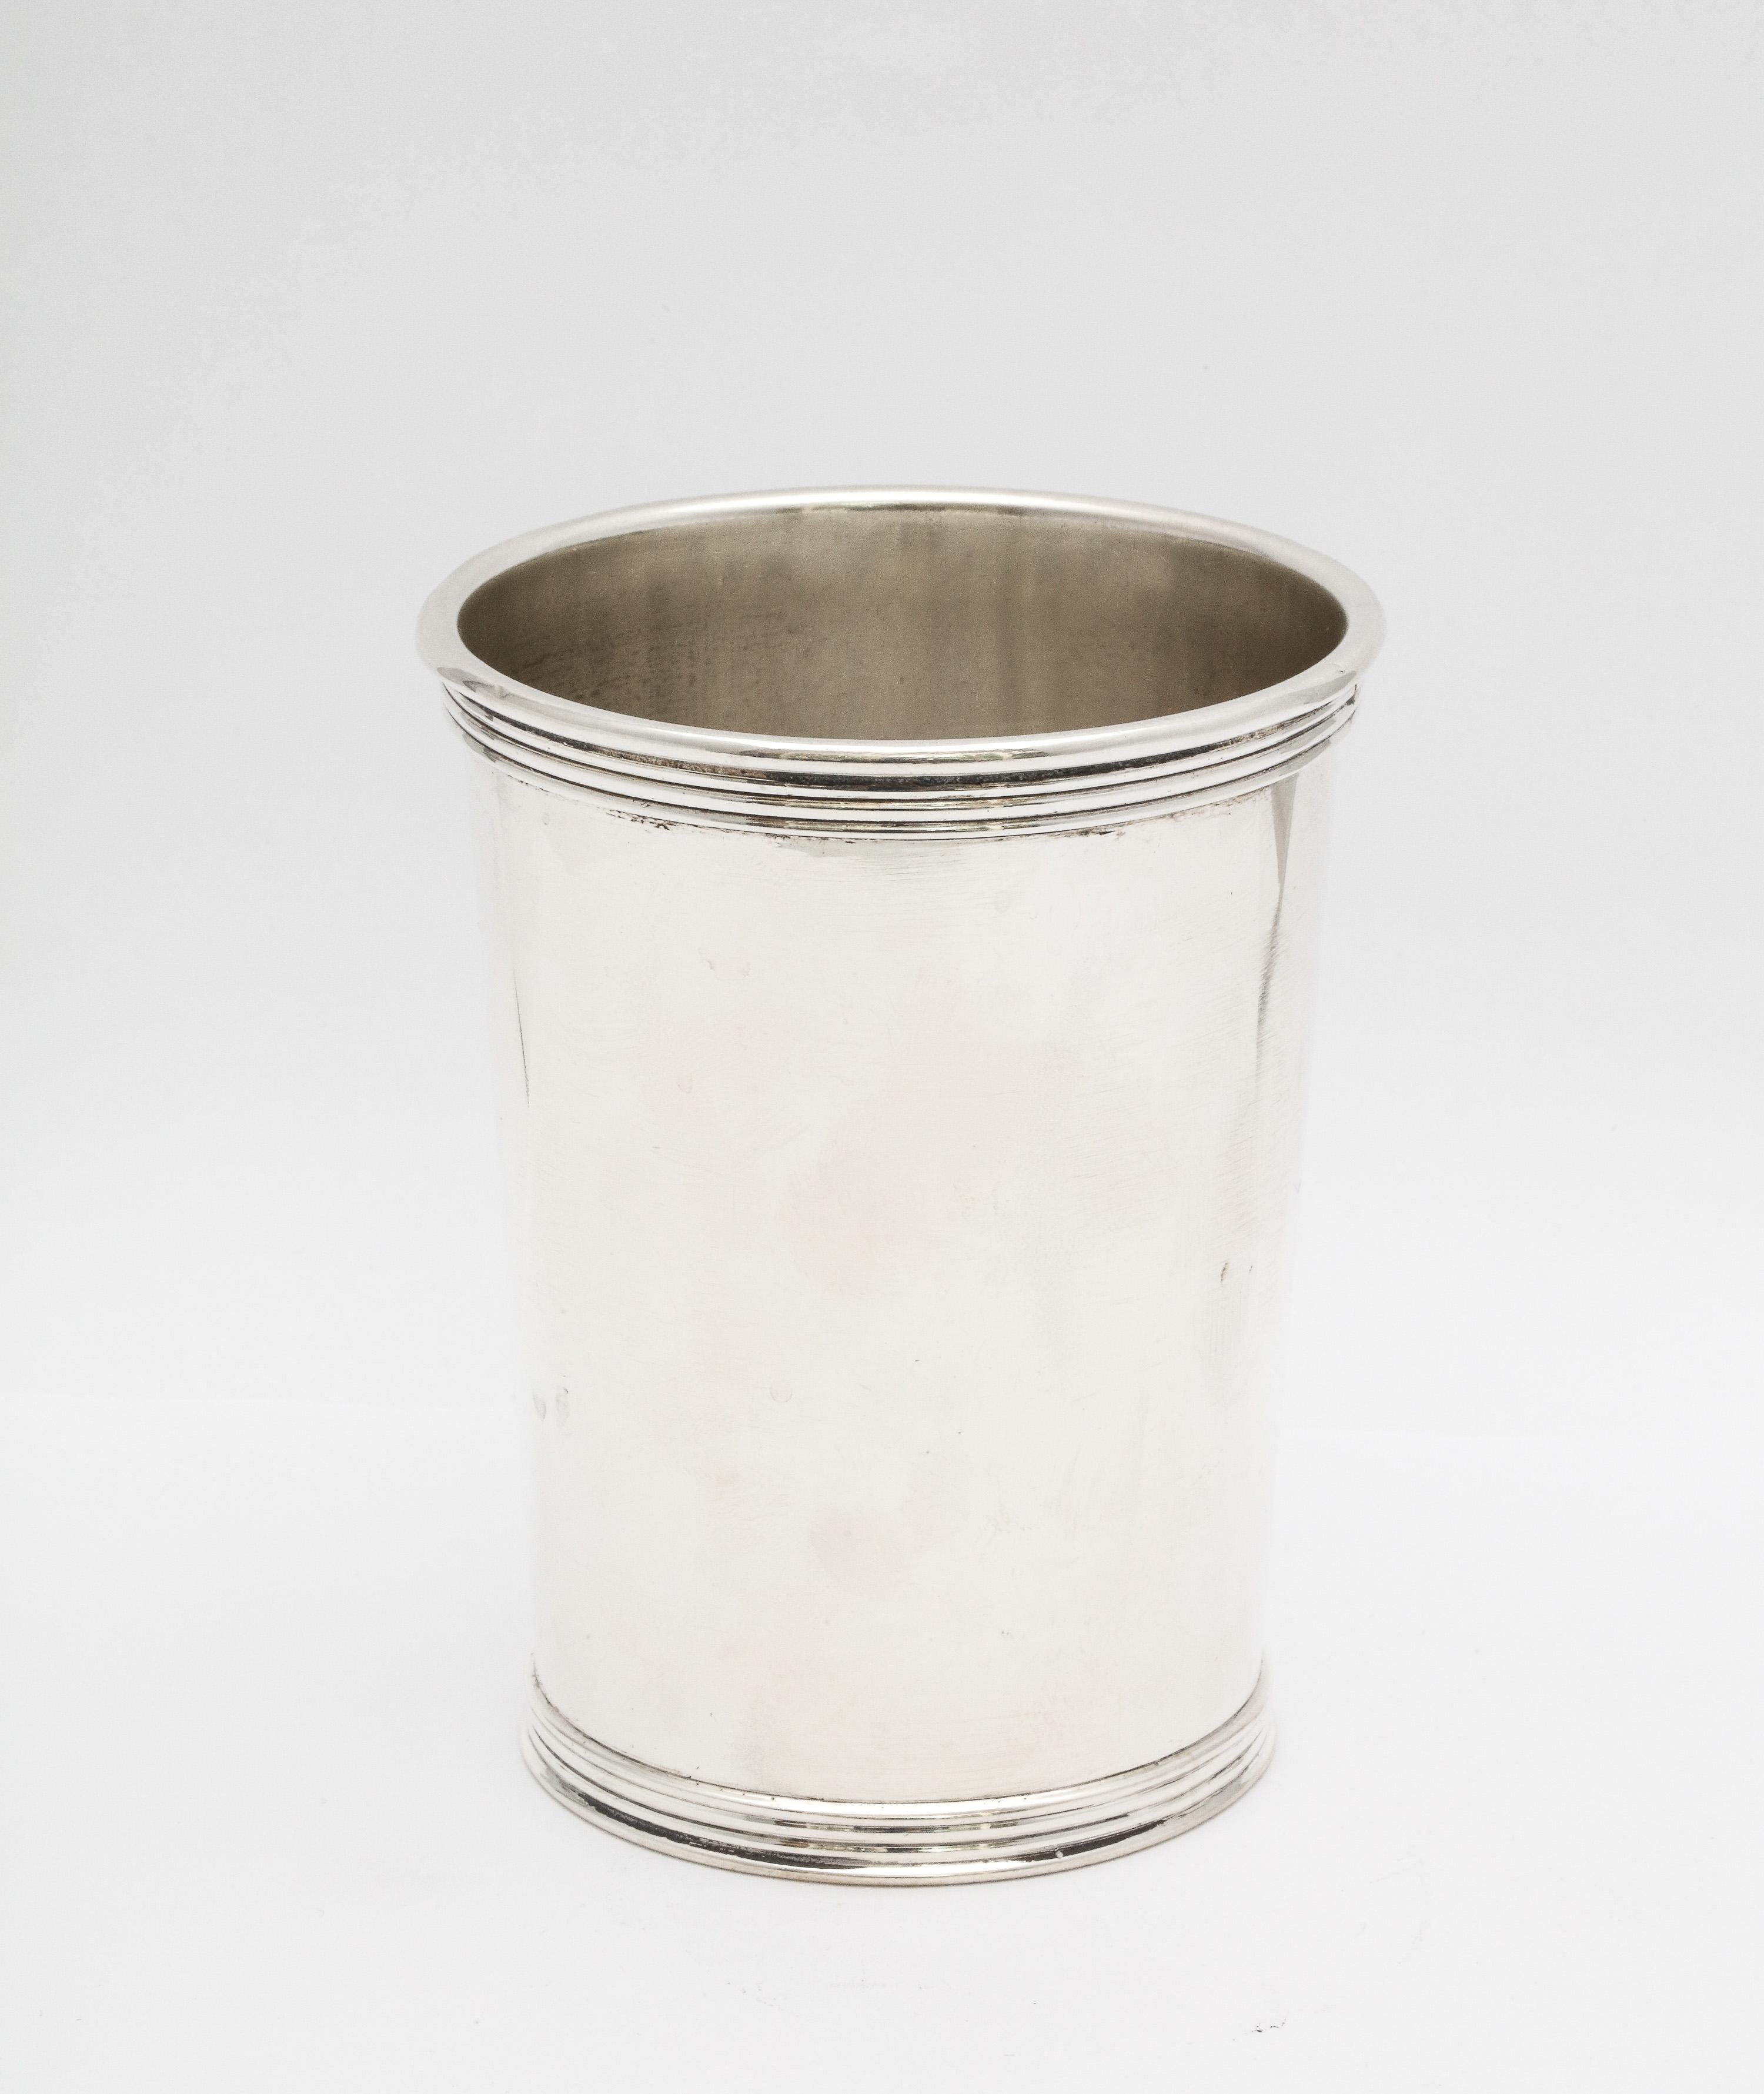 Edwardian period sterling silver mint julep cup, Simpson, Hall, Miller Co. (Division of International Silver Co.), Wallingford, Ct., circa 1910. Measures just under 4 inches high x 3 1/16 inches diameter across opening x 2 1/2 diameter across base.